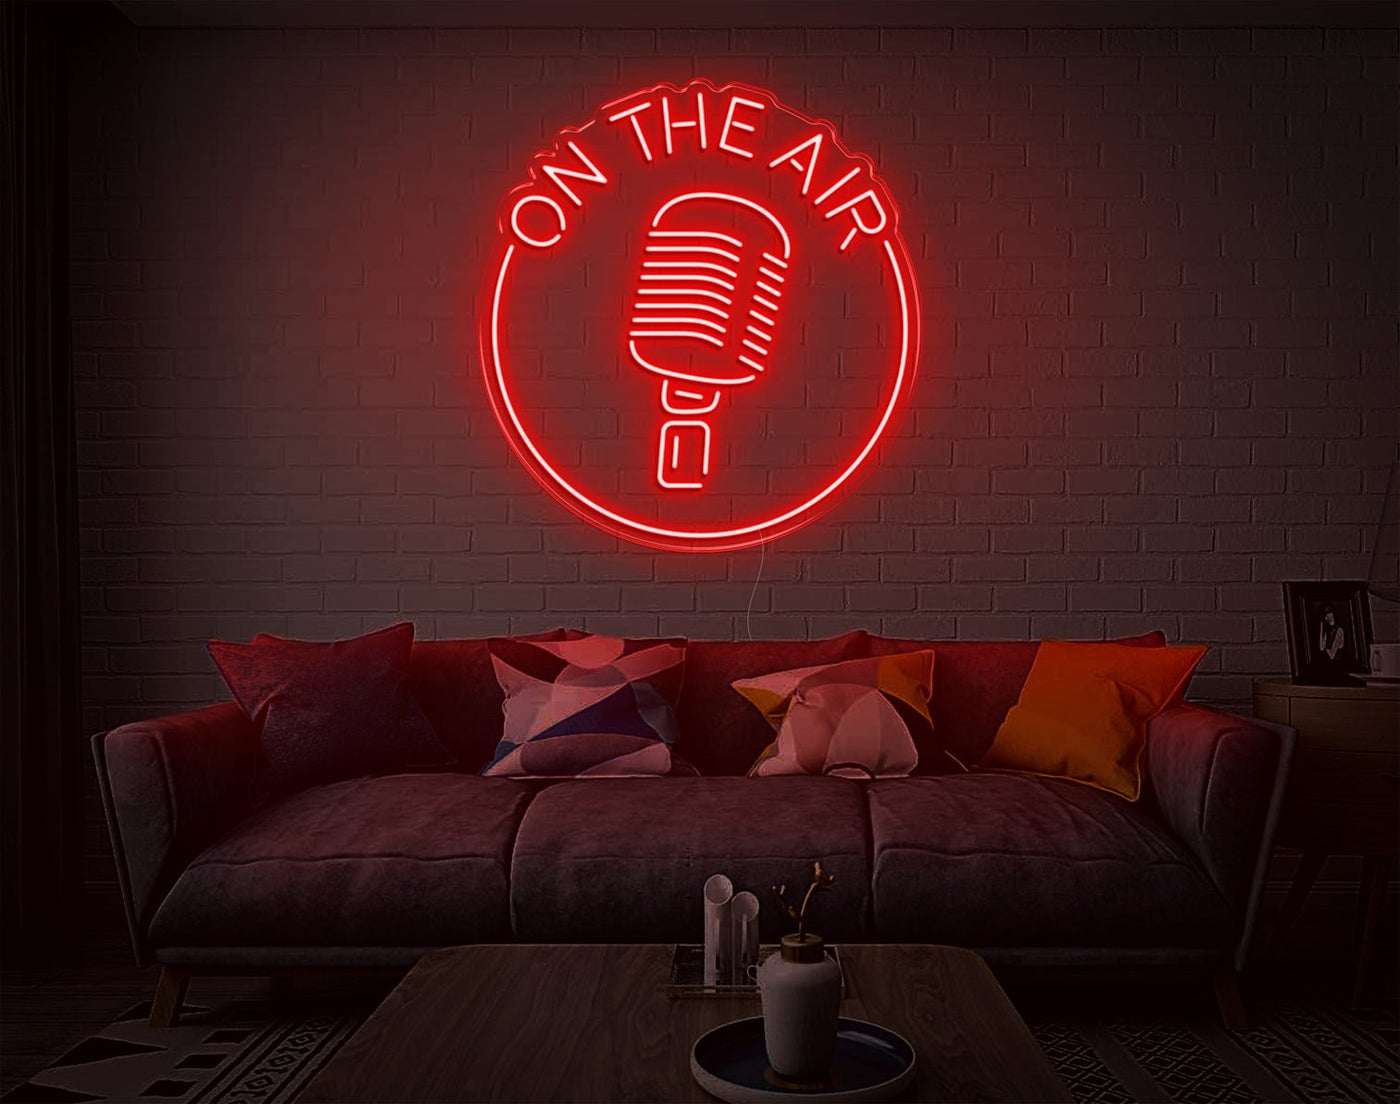 On The Air LED Neon Sign - 27inch x 26inchRed